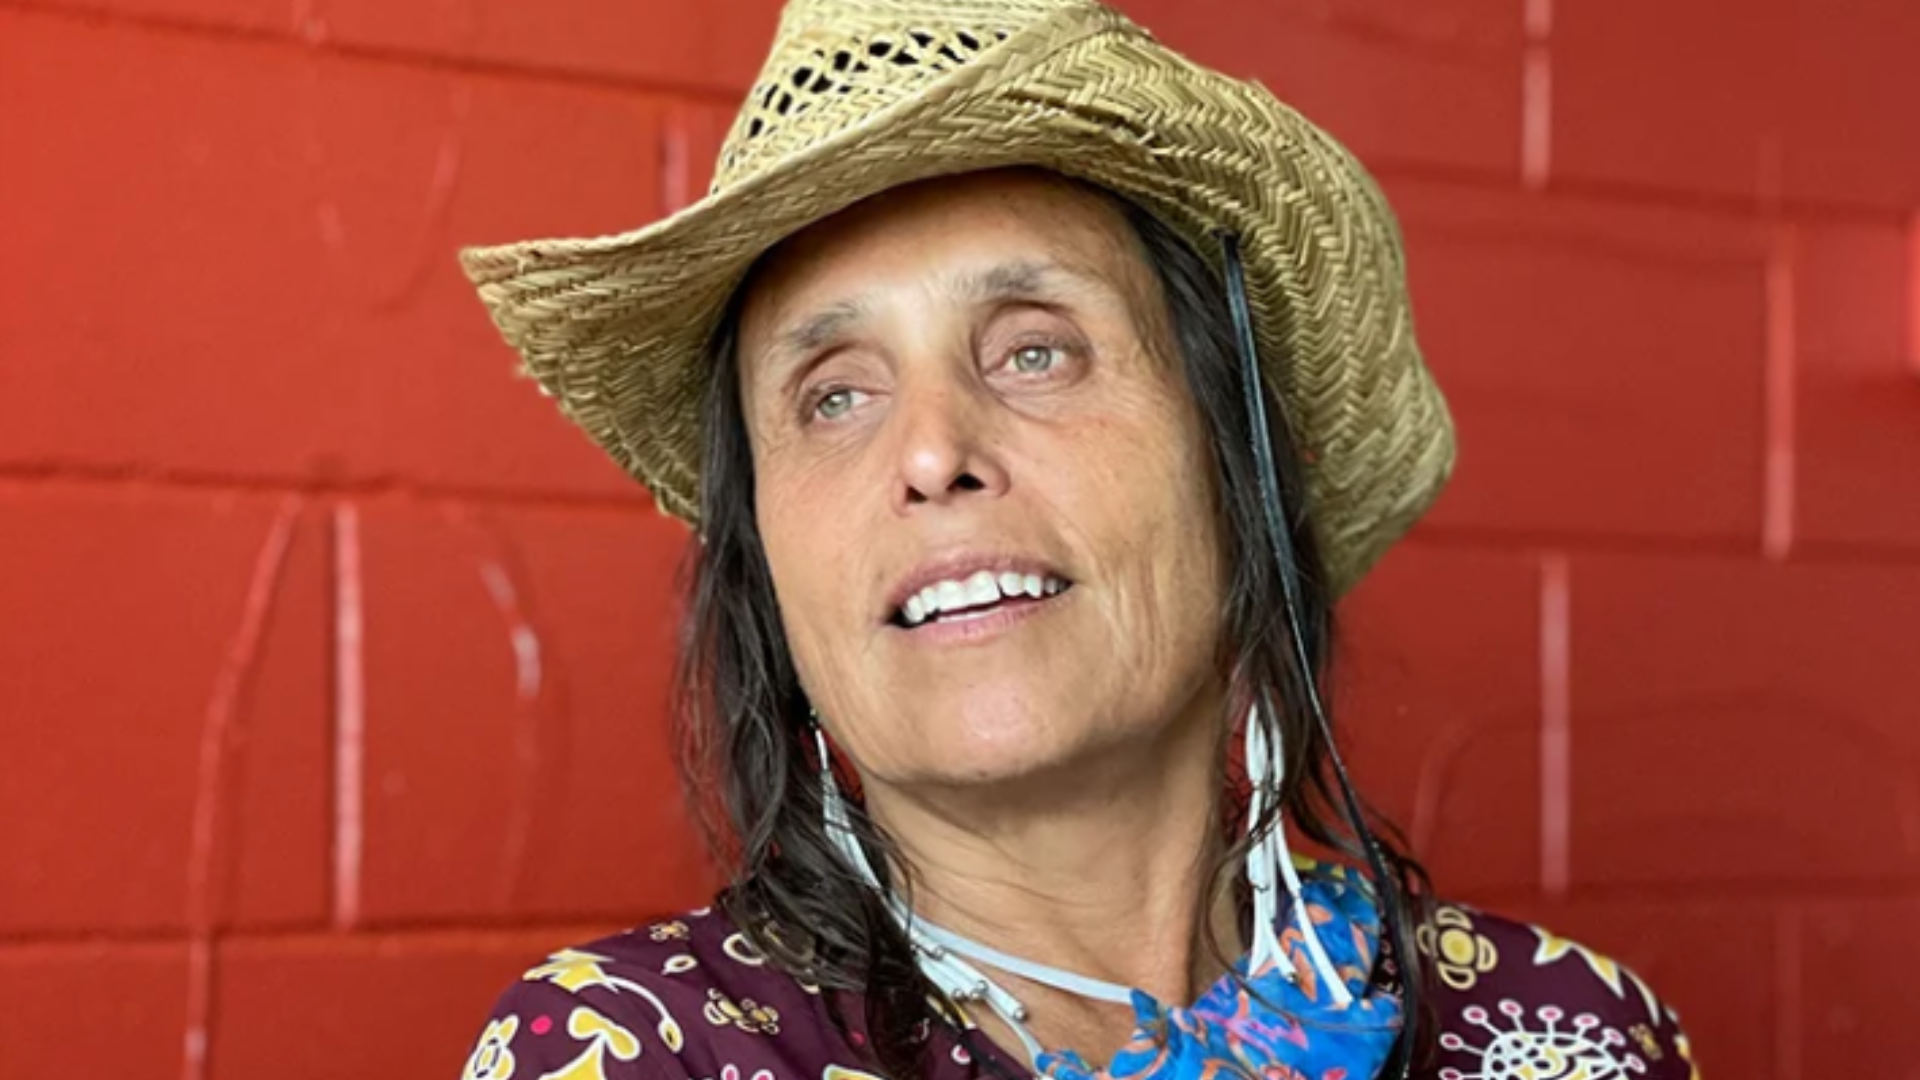 Phot of Winona LaDuke in front of a red brick wall wearing a straw hat.